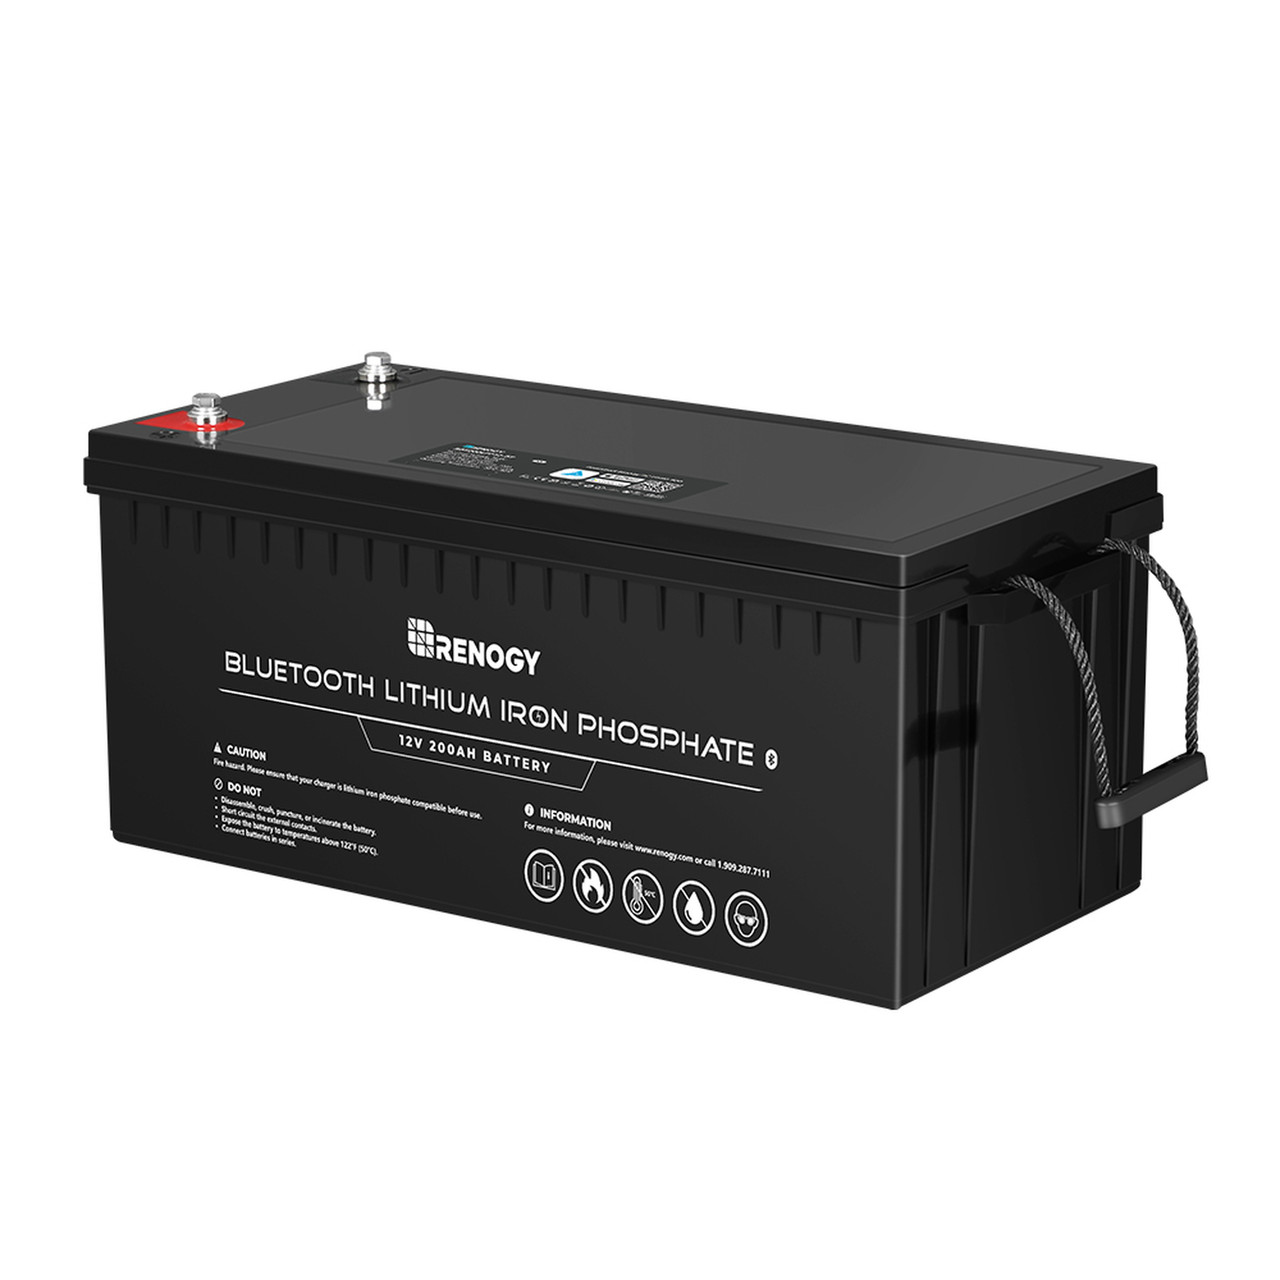 Renogy 12V 200Ah Lithium Iron Phosphate (LiFePo4) Battery with Bluetooth | 2000 Cycles